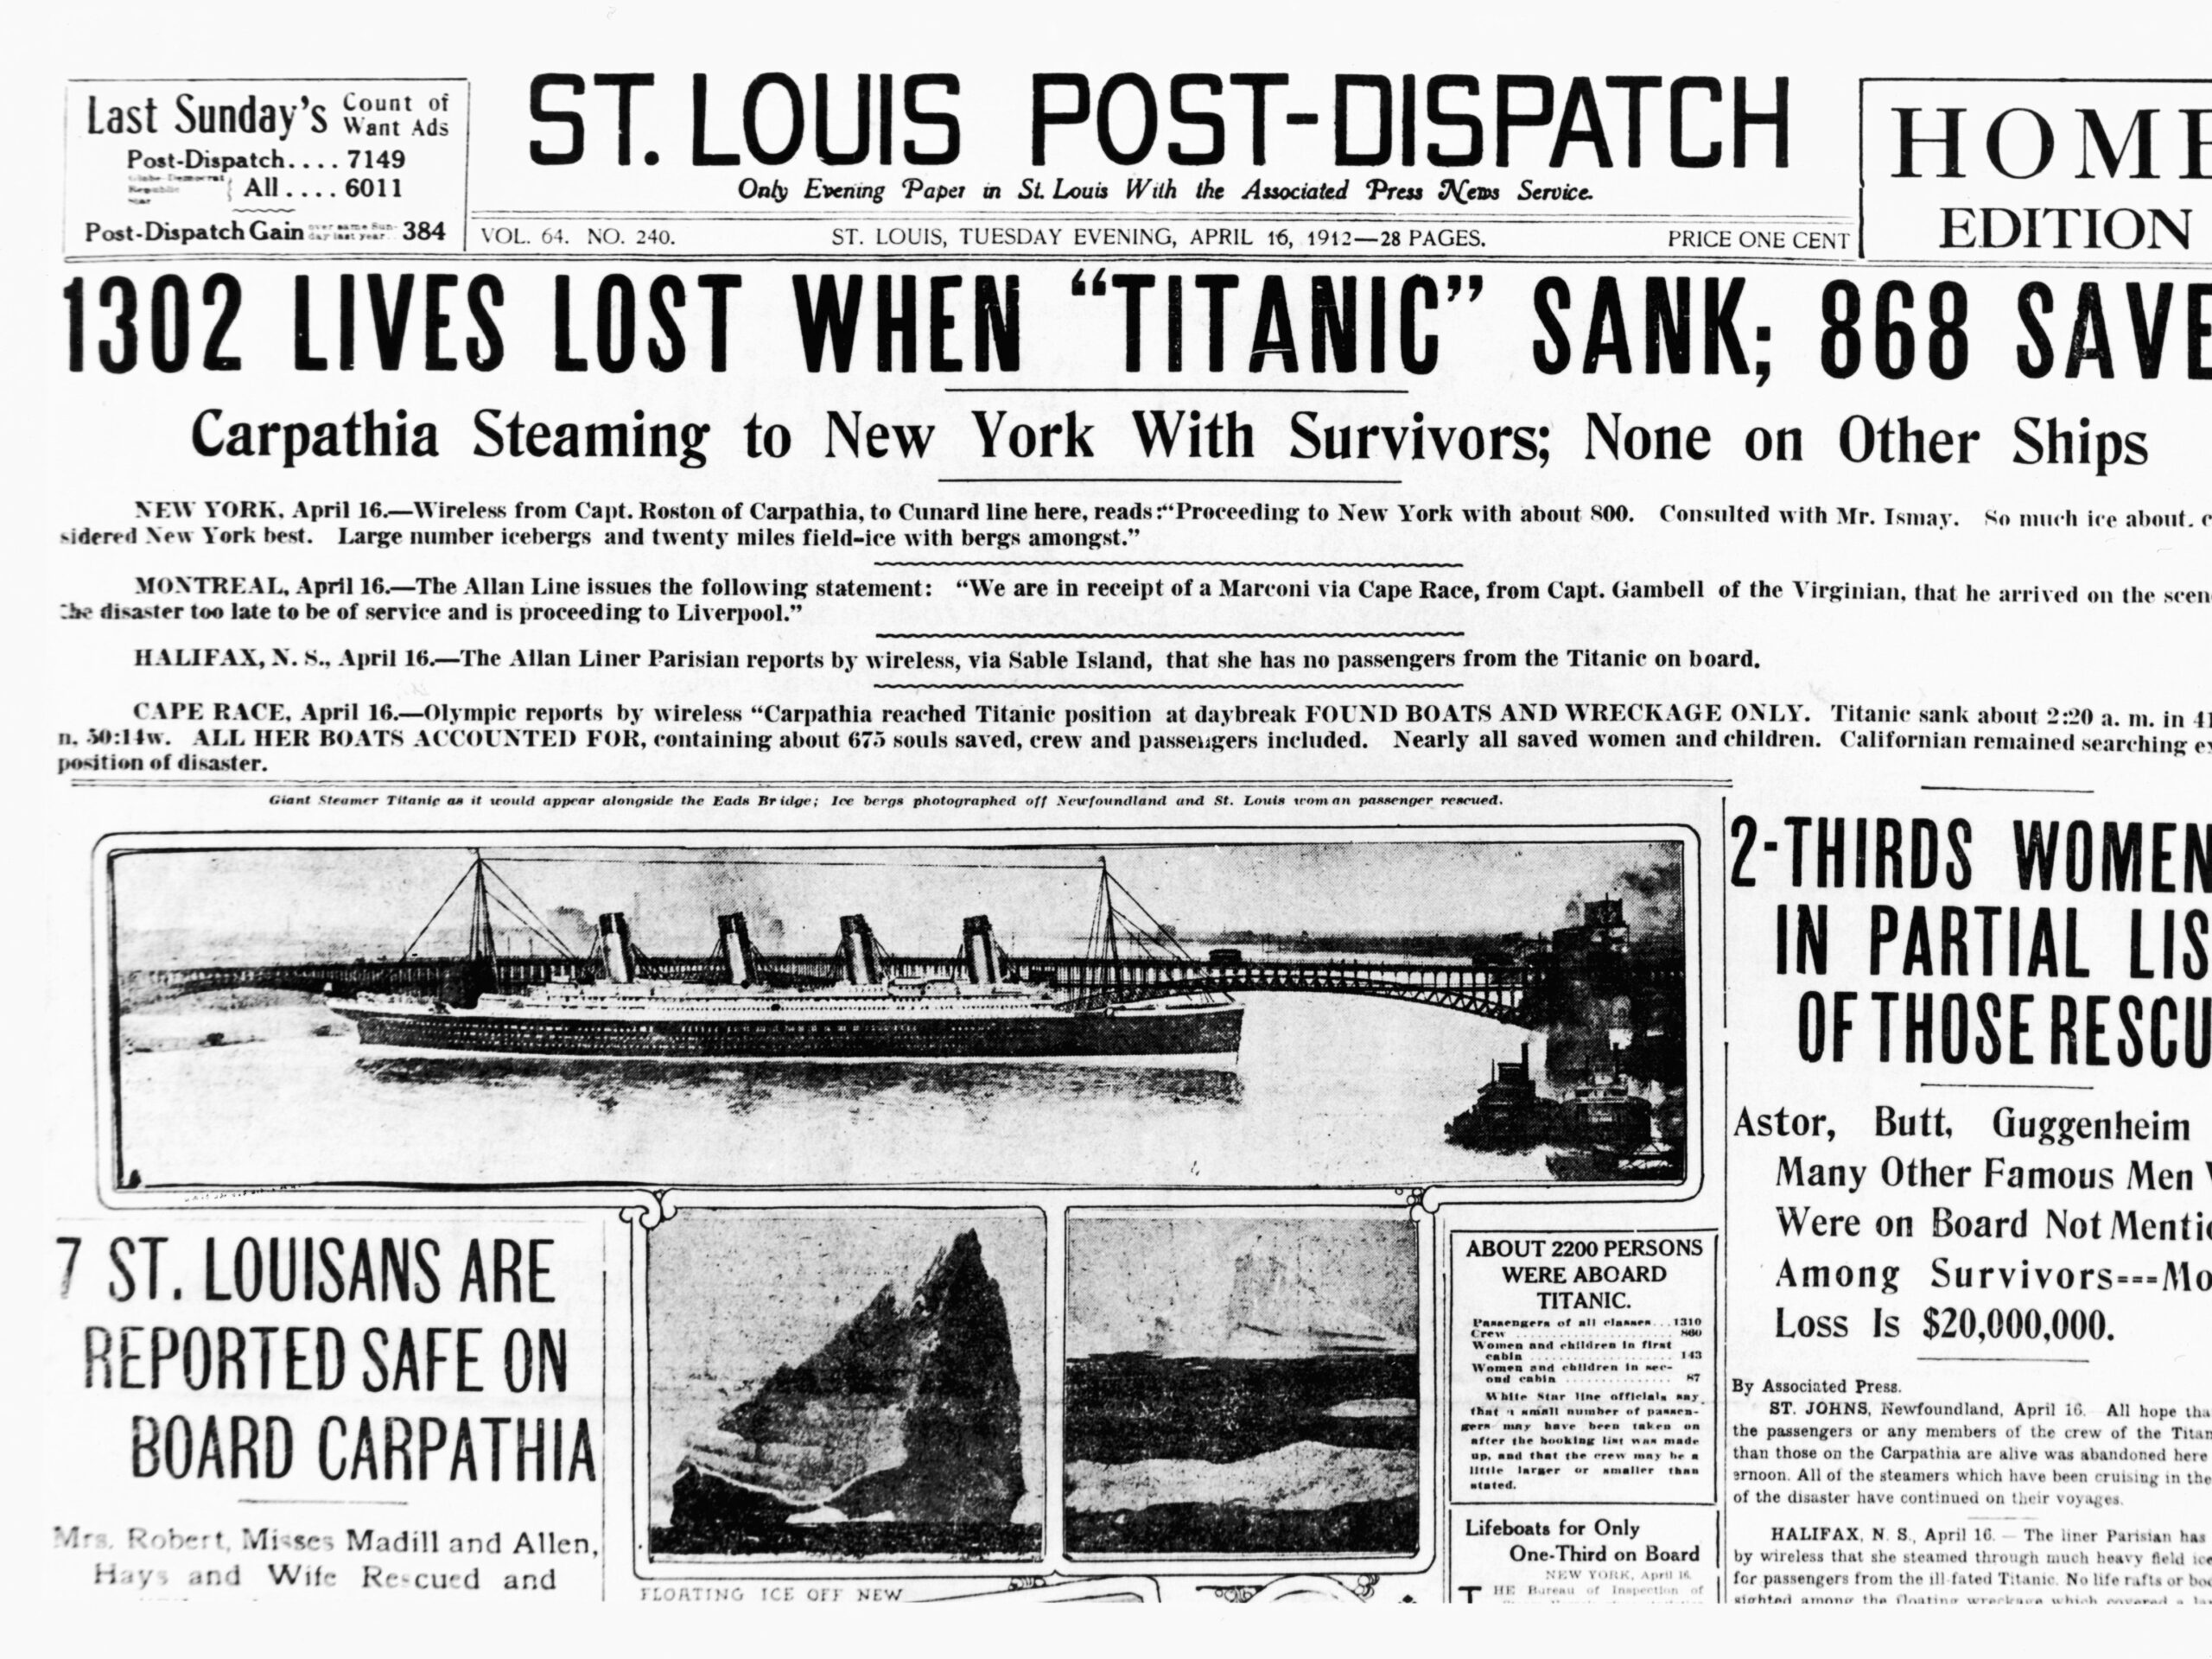 The front page of the St.Louis Post-Dispatch of 16th April 1912.